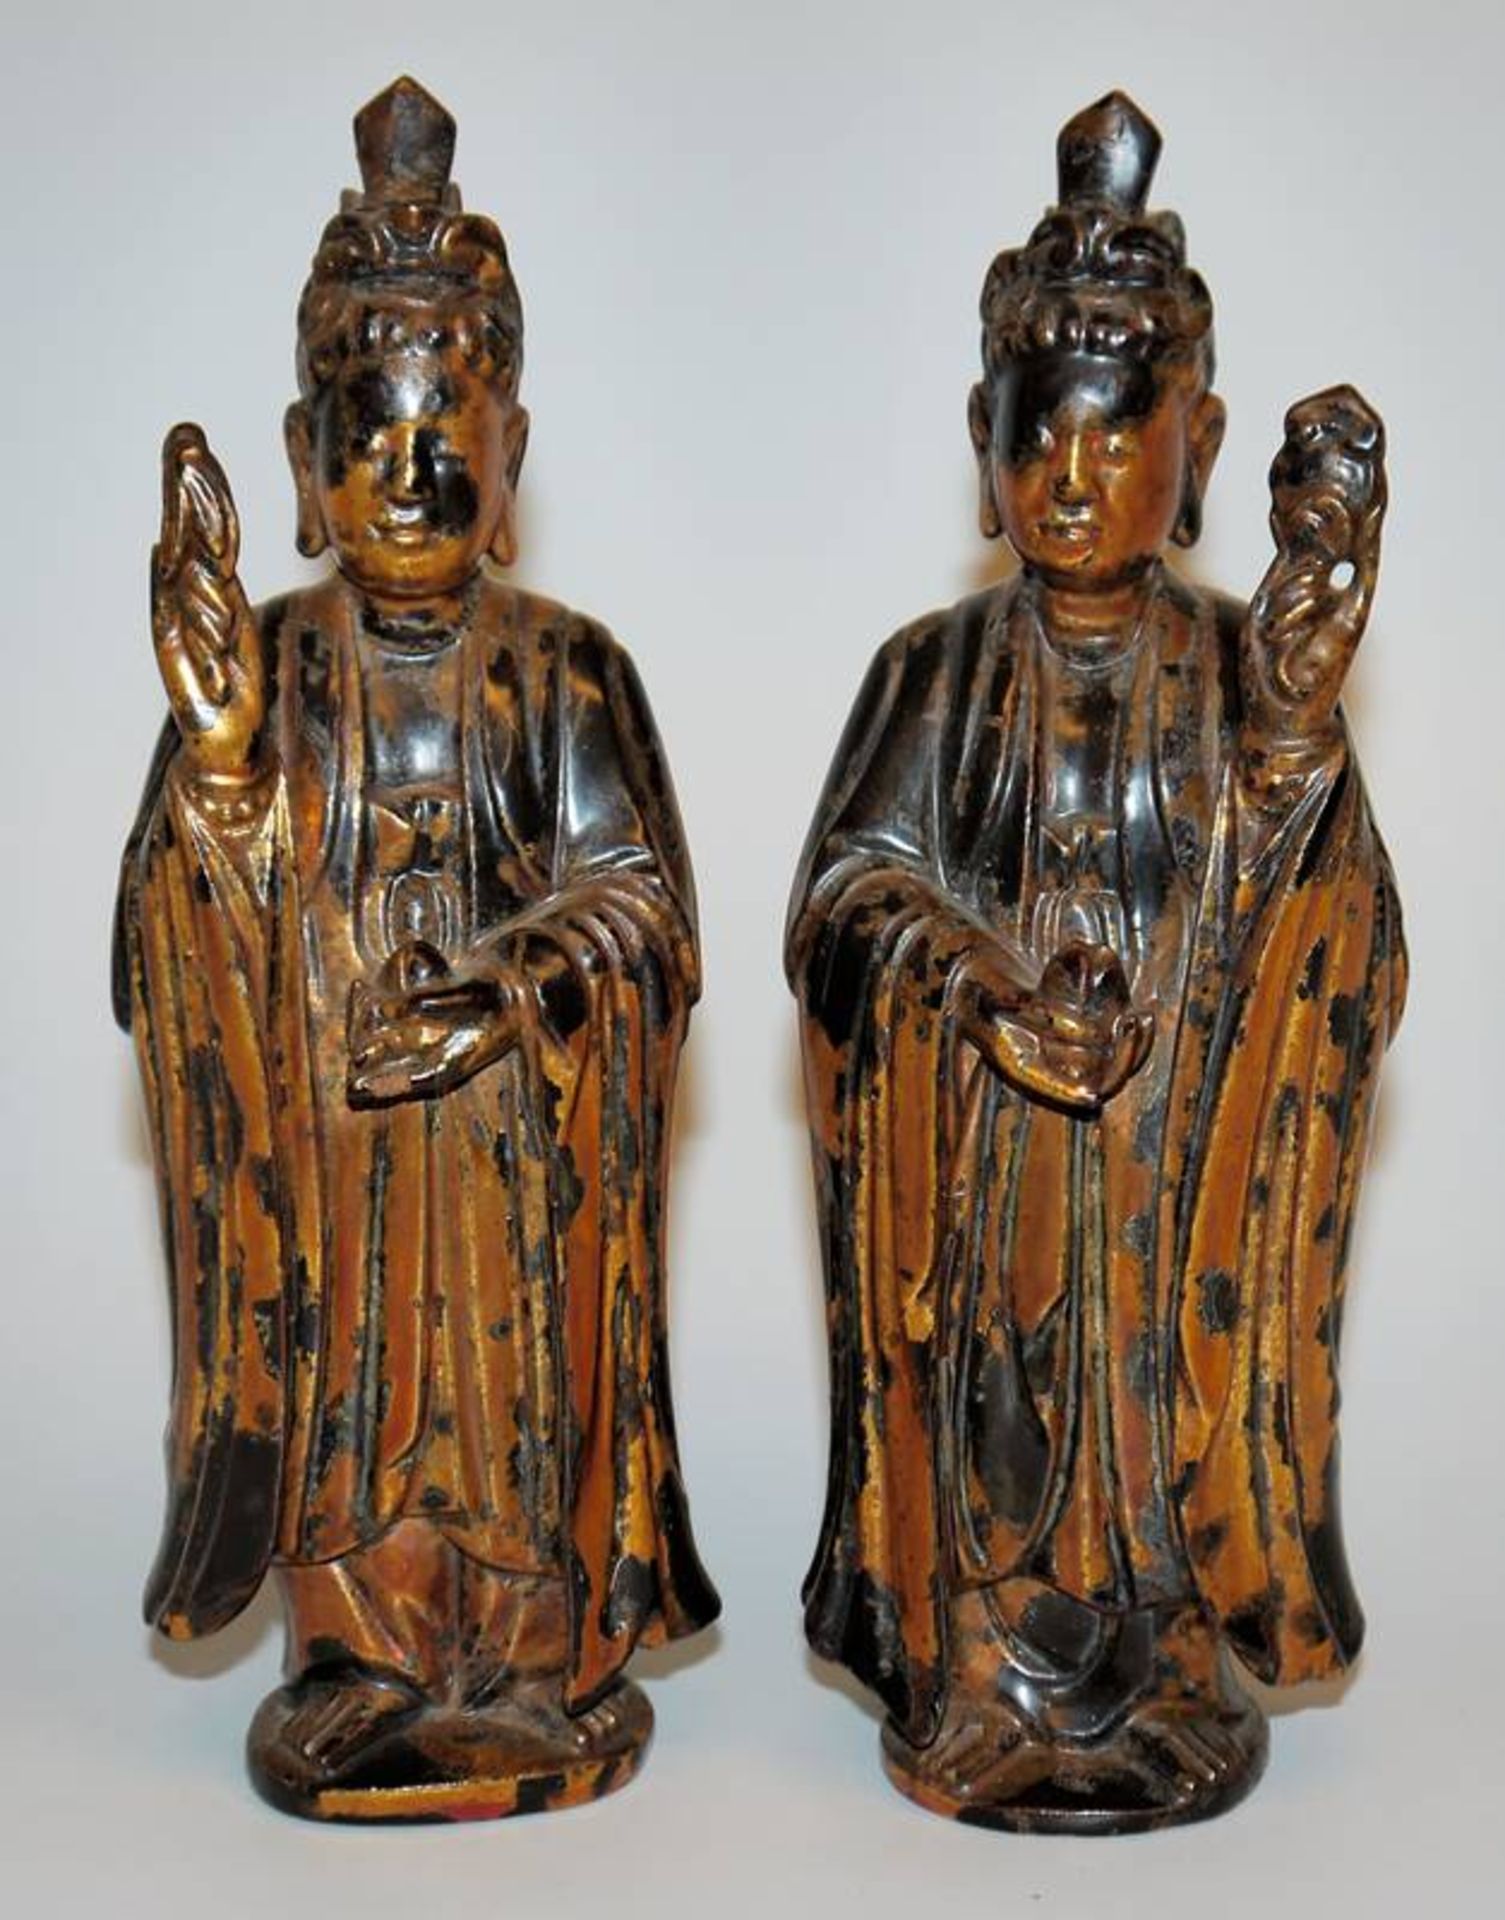 Two lacquered altar figures, Vietnam 18th/19th century